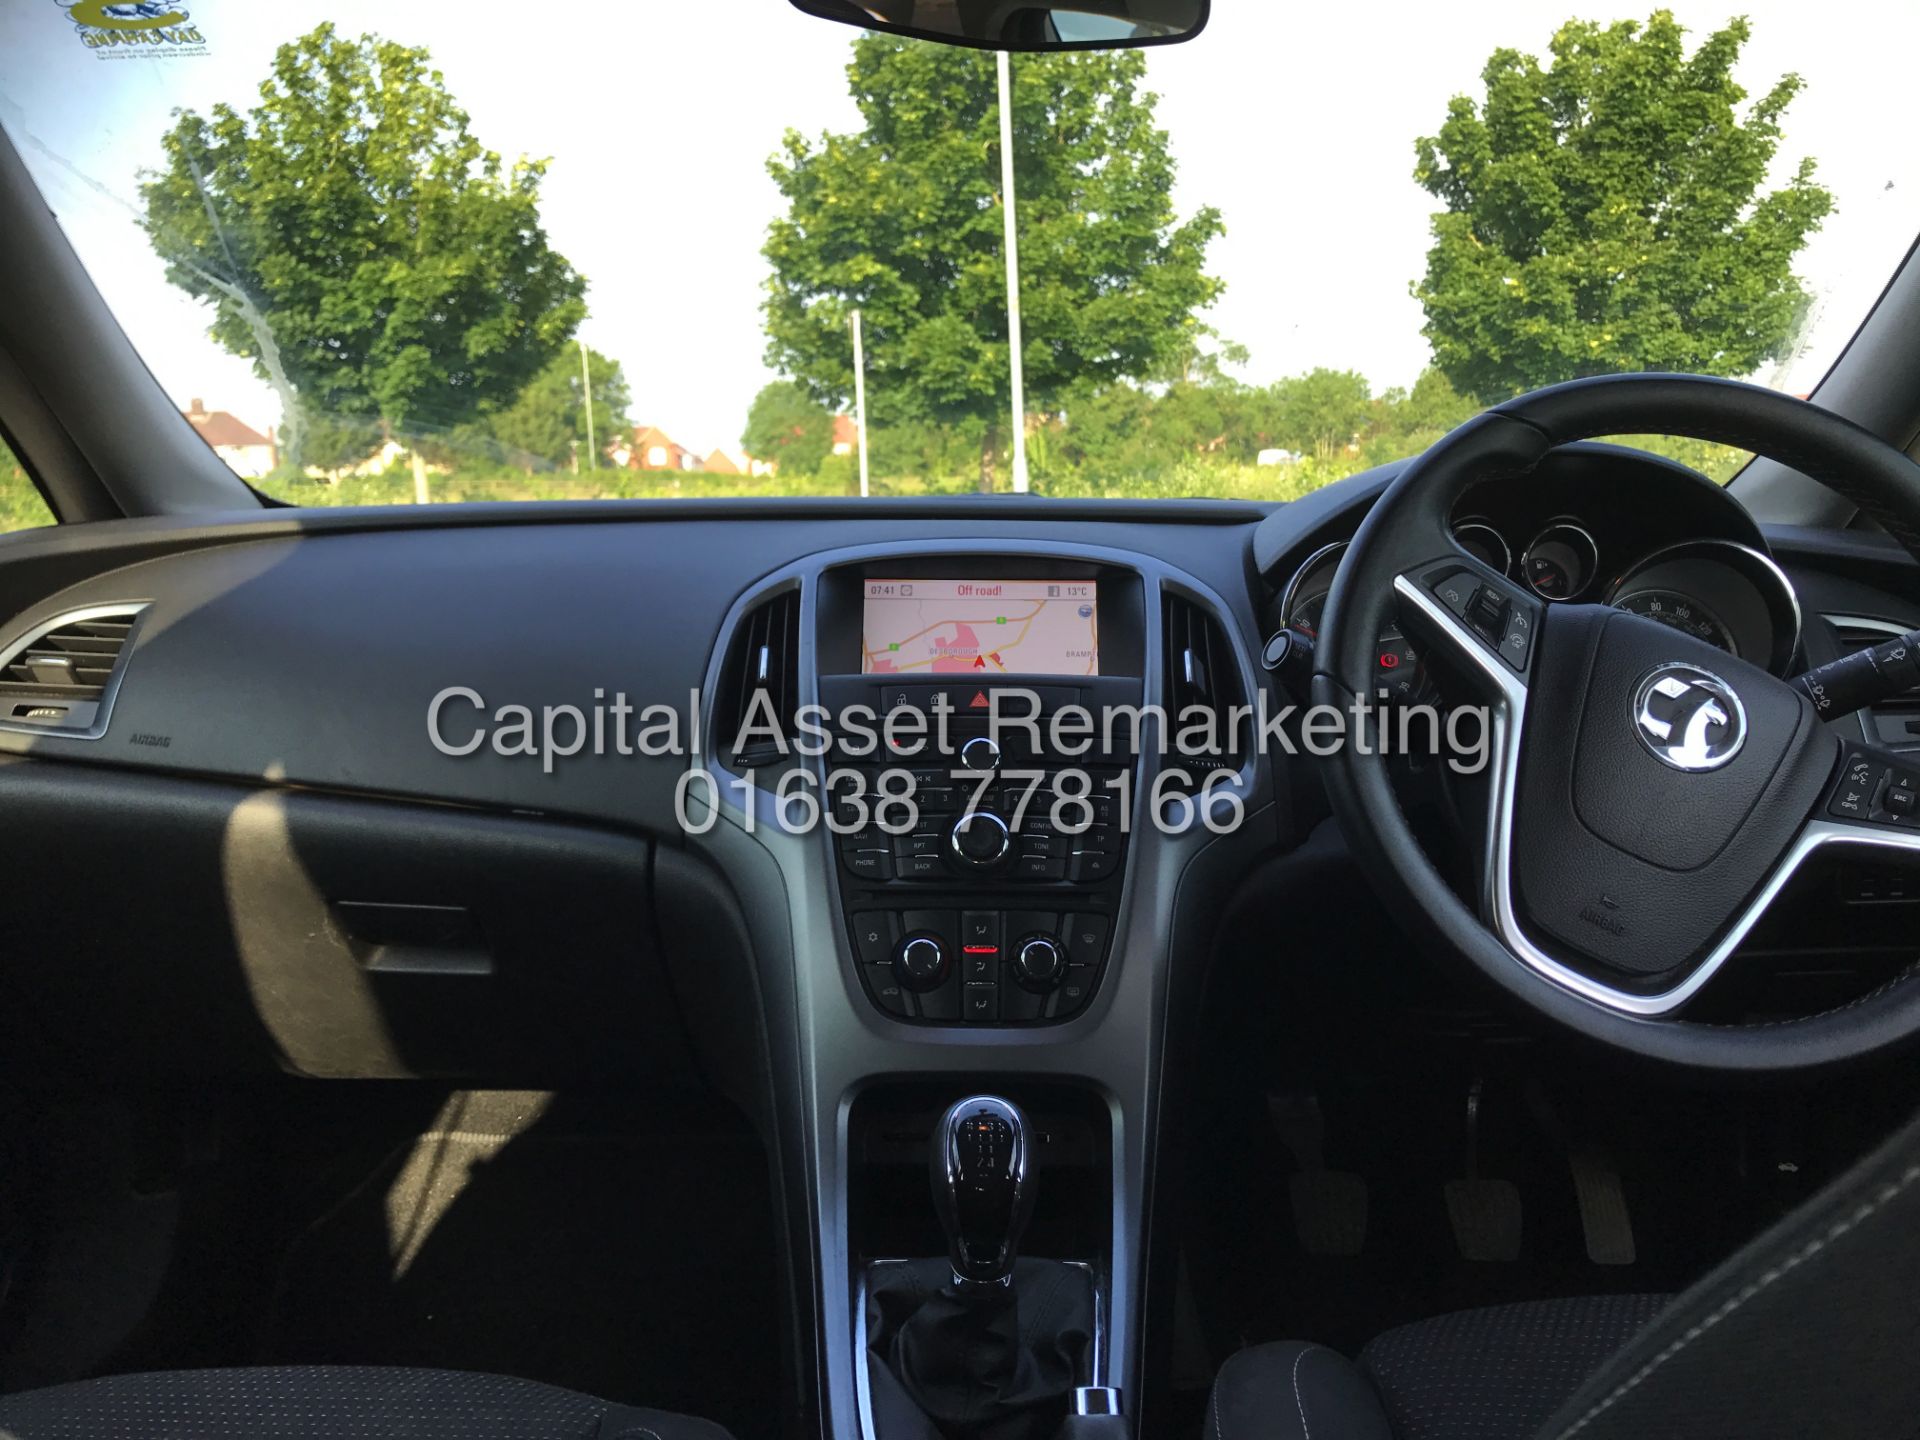 On Sale VAUXHALL ASTRA 1.3CDTI "TECH LINE" ESTATE (2013 MODEL) 1 OWNER WITH HISTORY SAT NAV AIR CON - Image 12 of 20